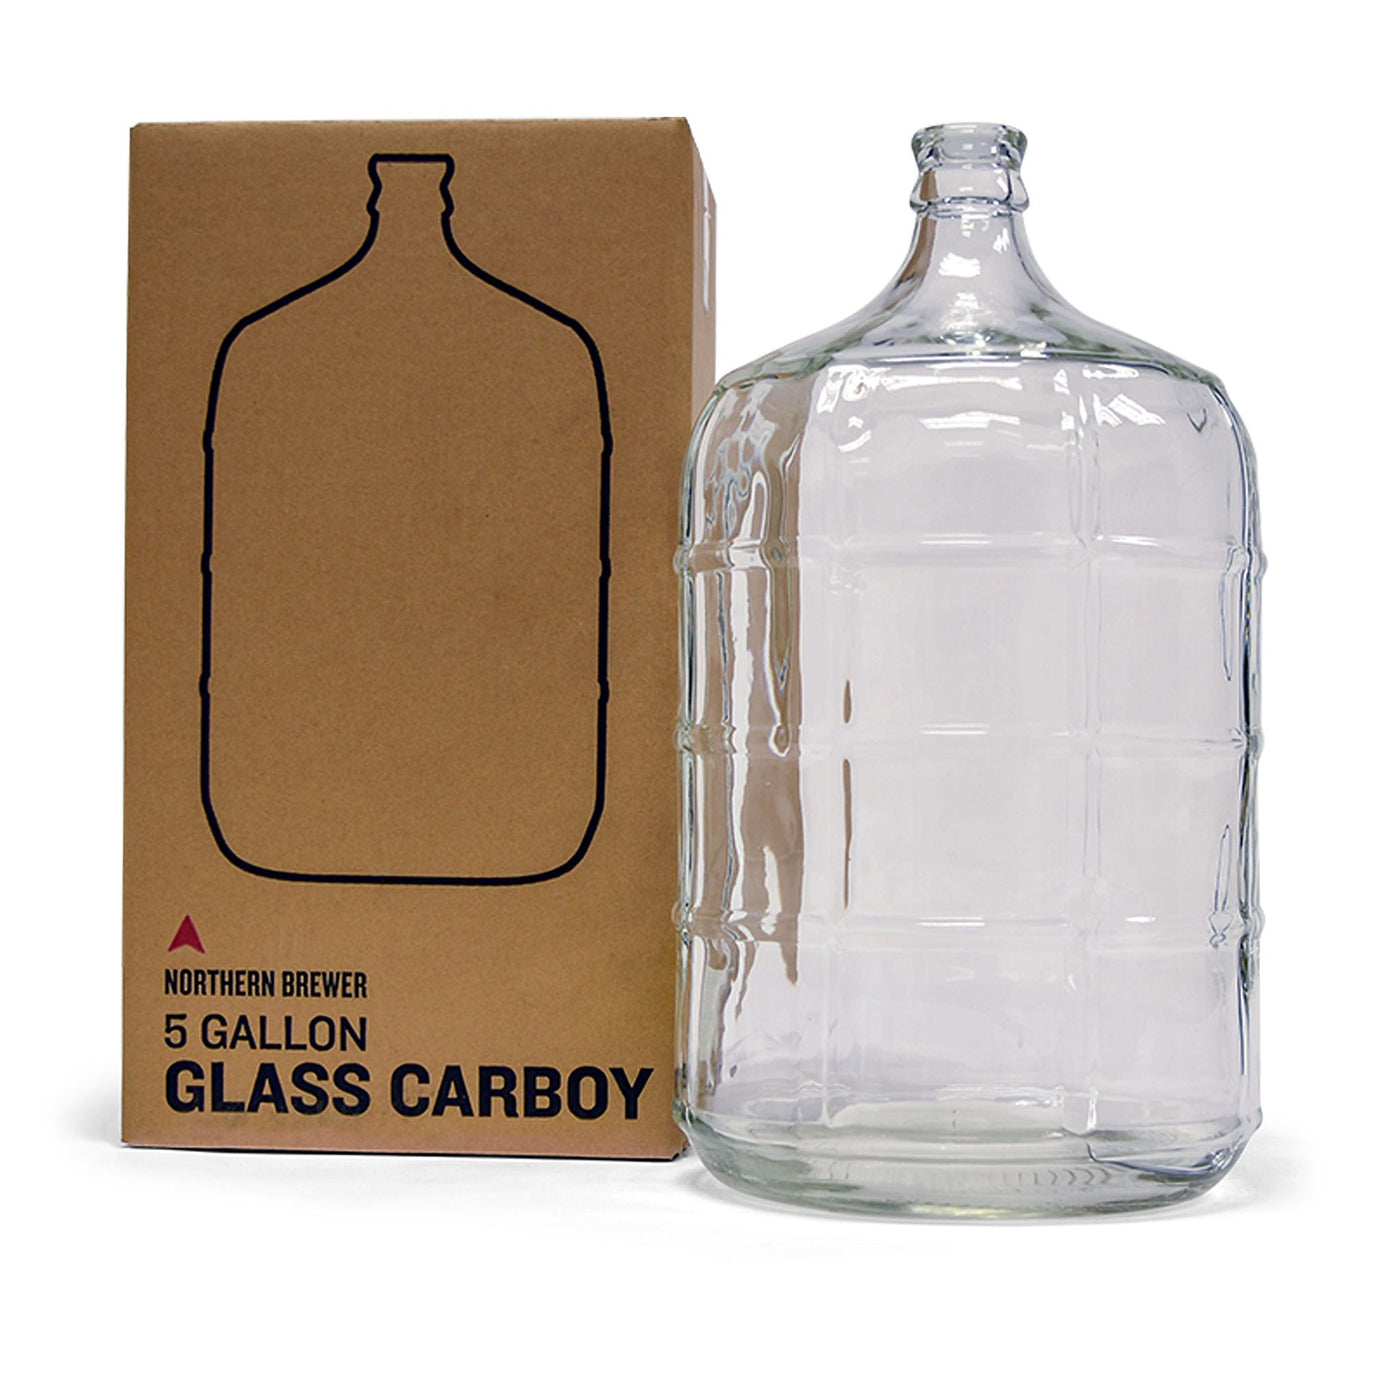 5 Gallon Glass Carboy with Shipping Container.